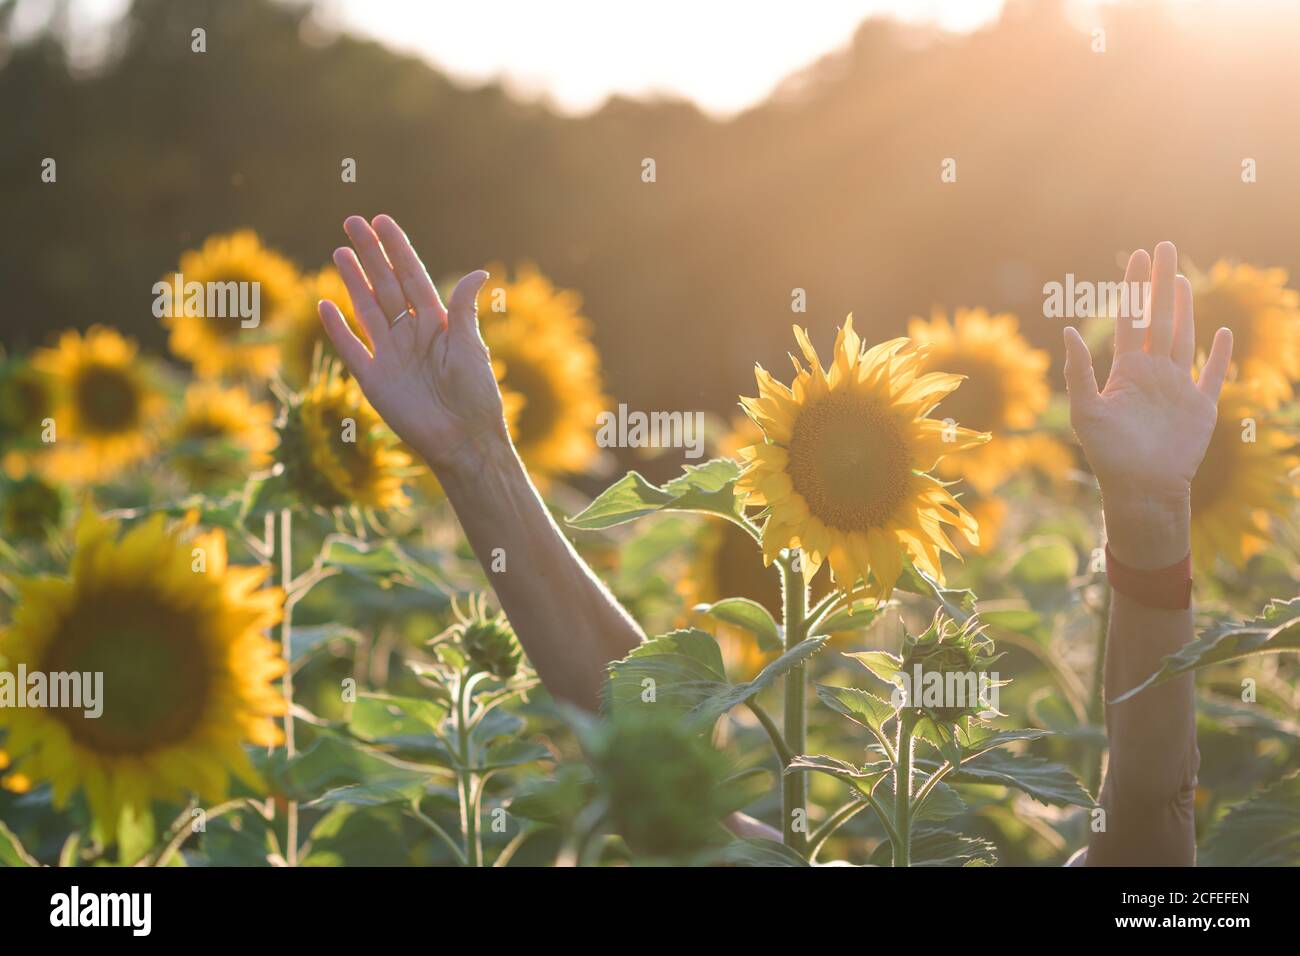 Field with sunflowers and outstretched arms between the flower heads Stock Photo